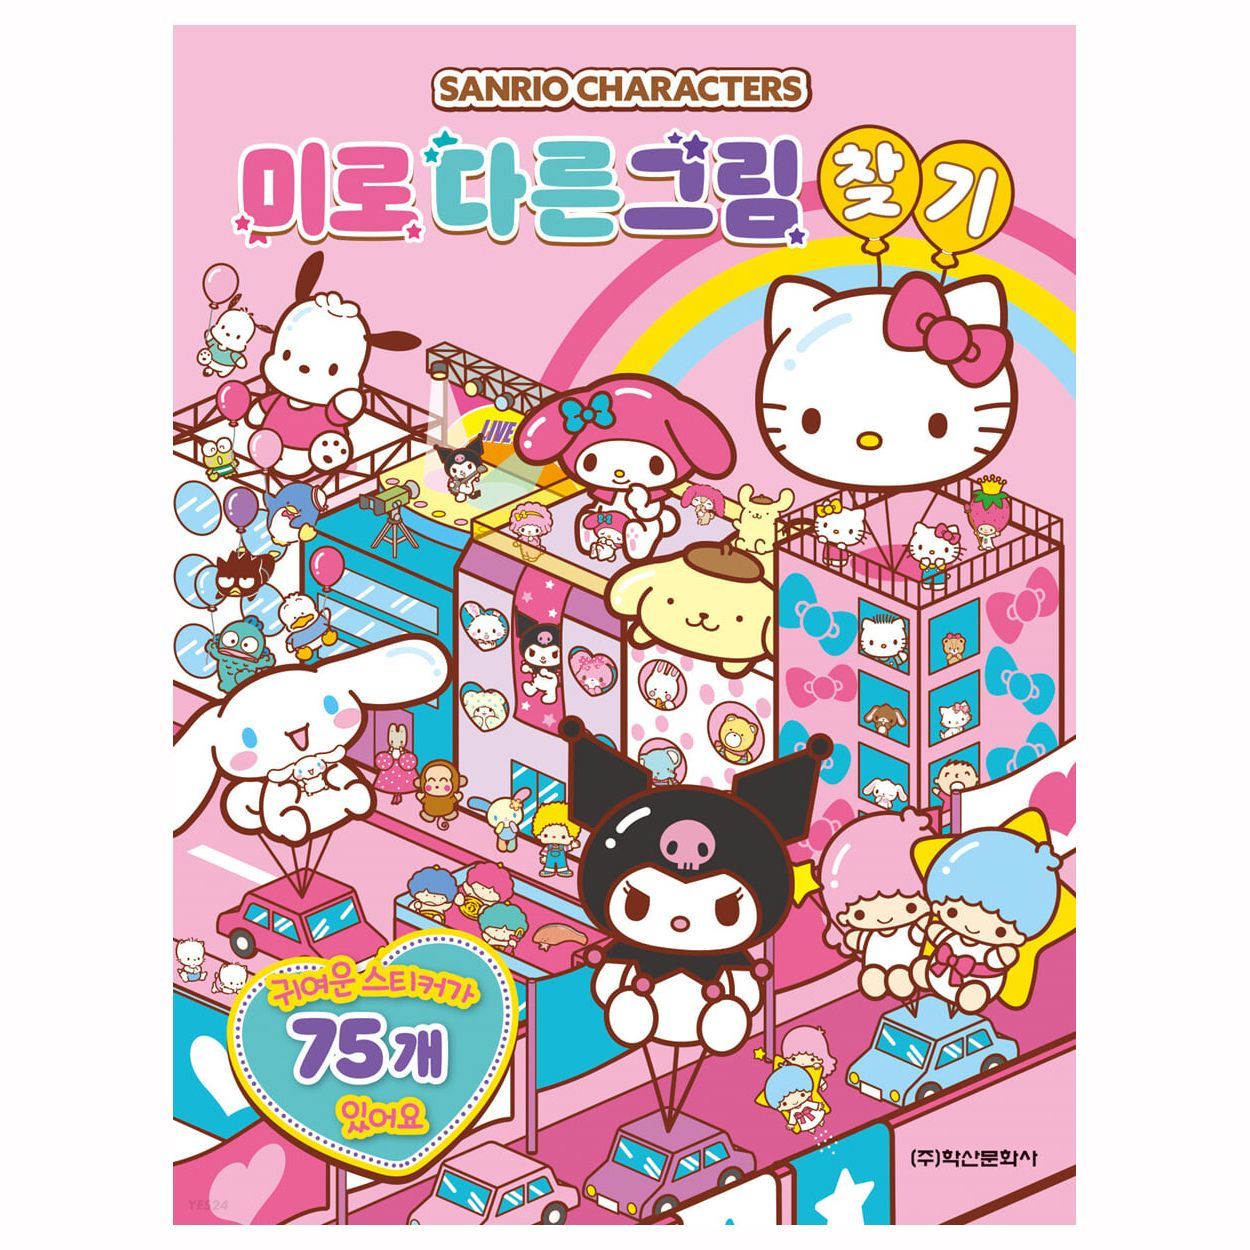 Sanrio Maze Find another picture